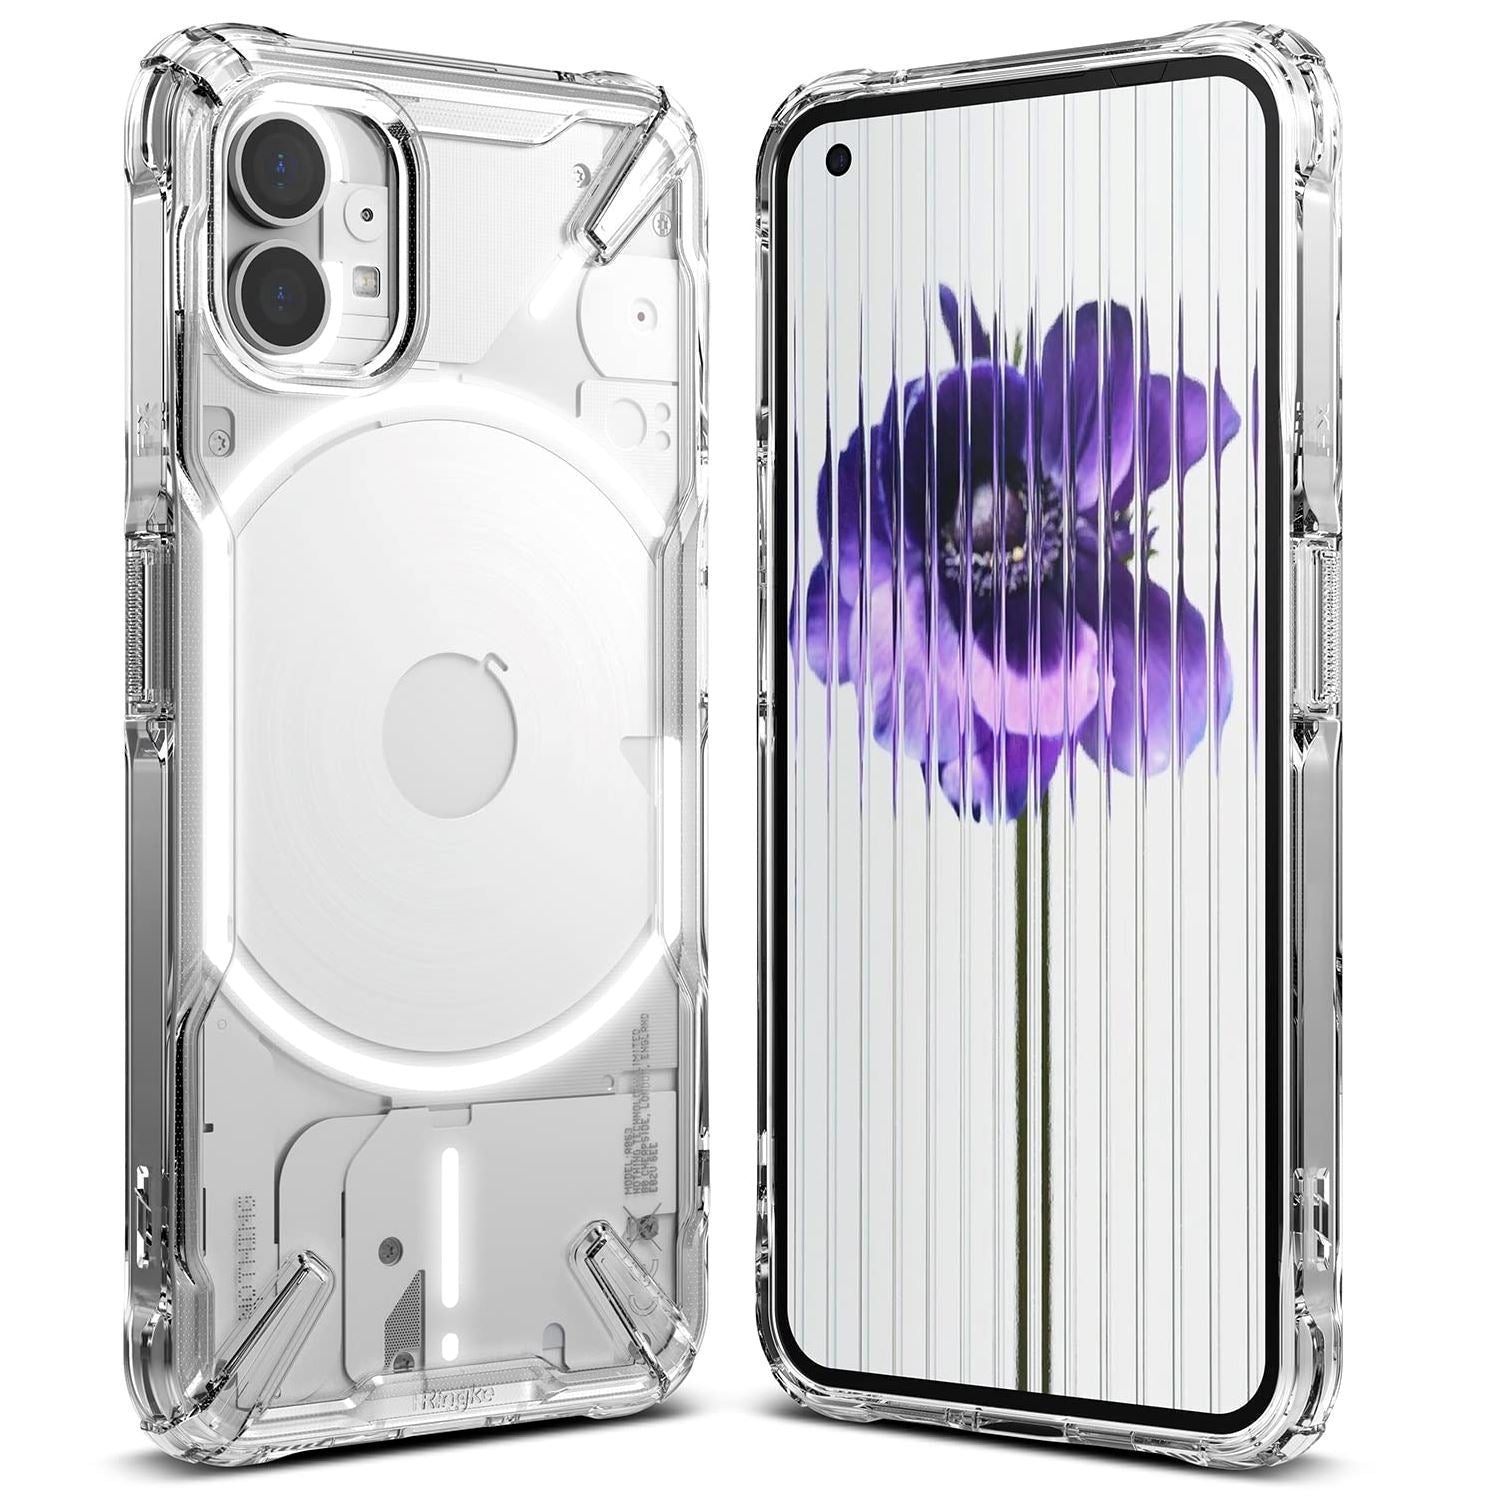 Ringke Fusion-X Case for Nothing Phone 1, Transparent Hard Back Soft Flexible TPU Bumper Scratch Resistant Shockproof Protection Back Cover ONE2WORLD Clear 